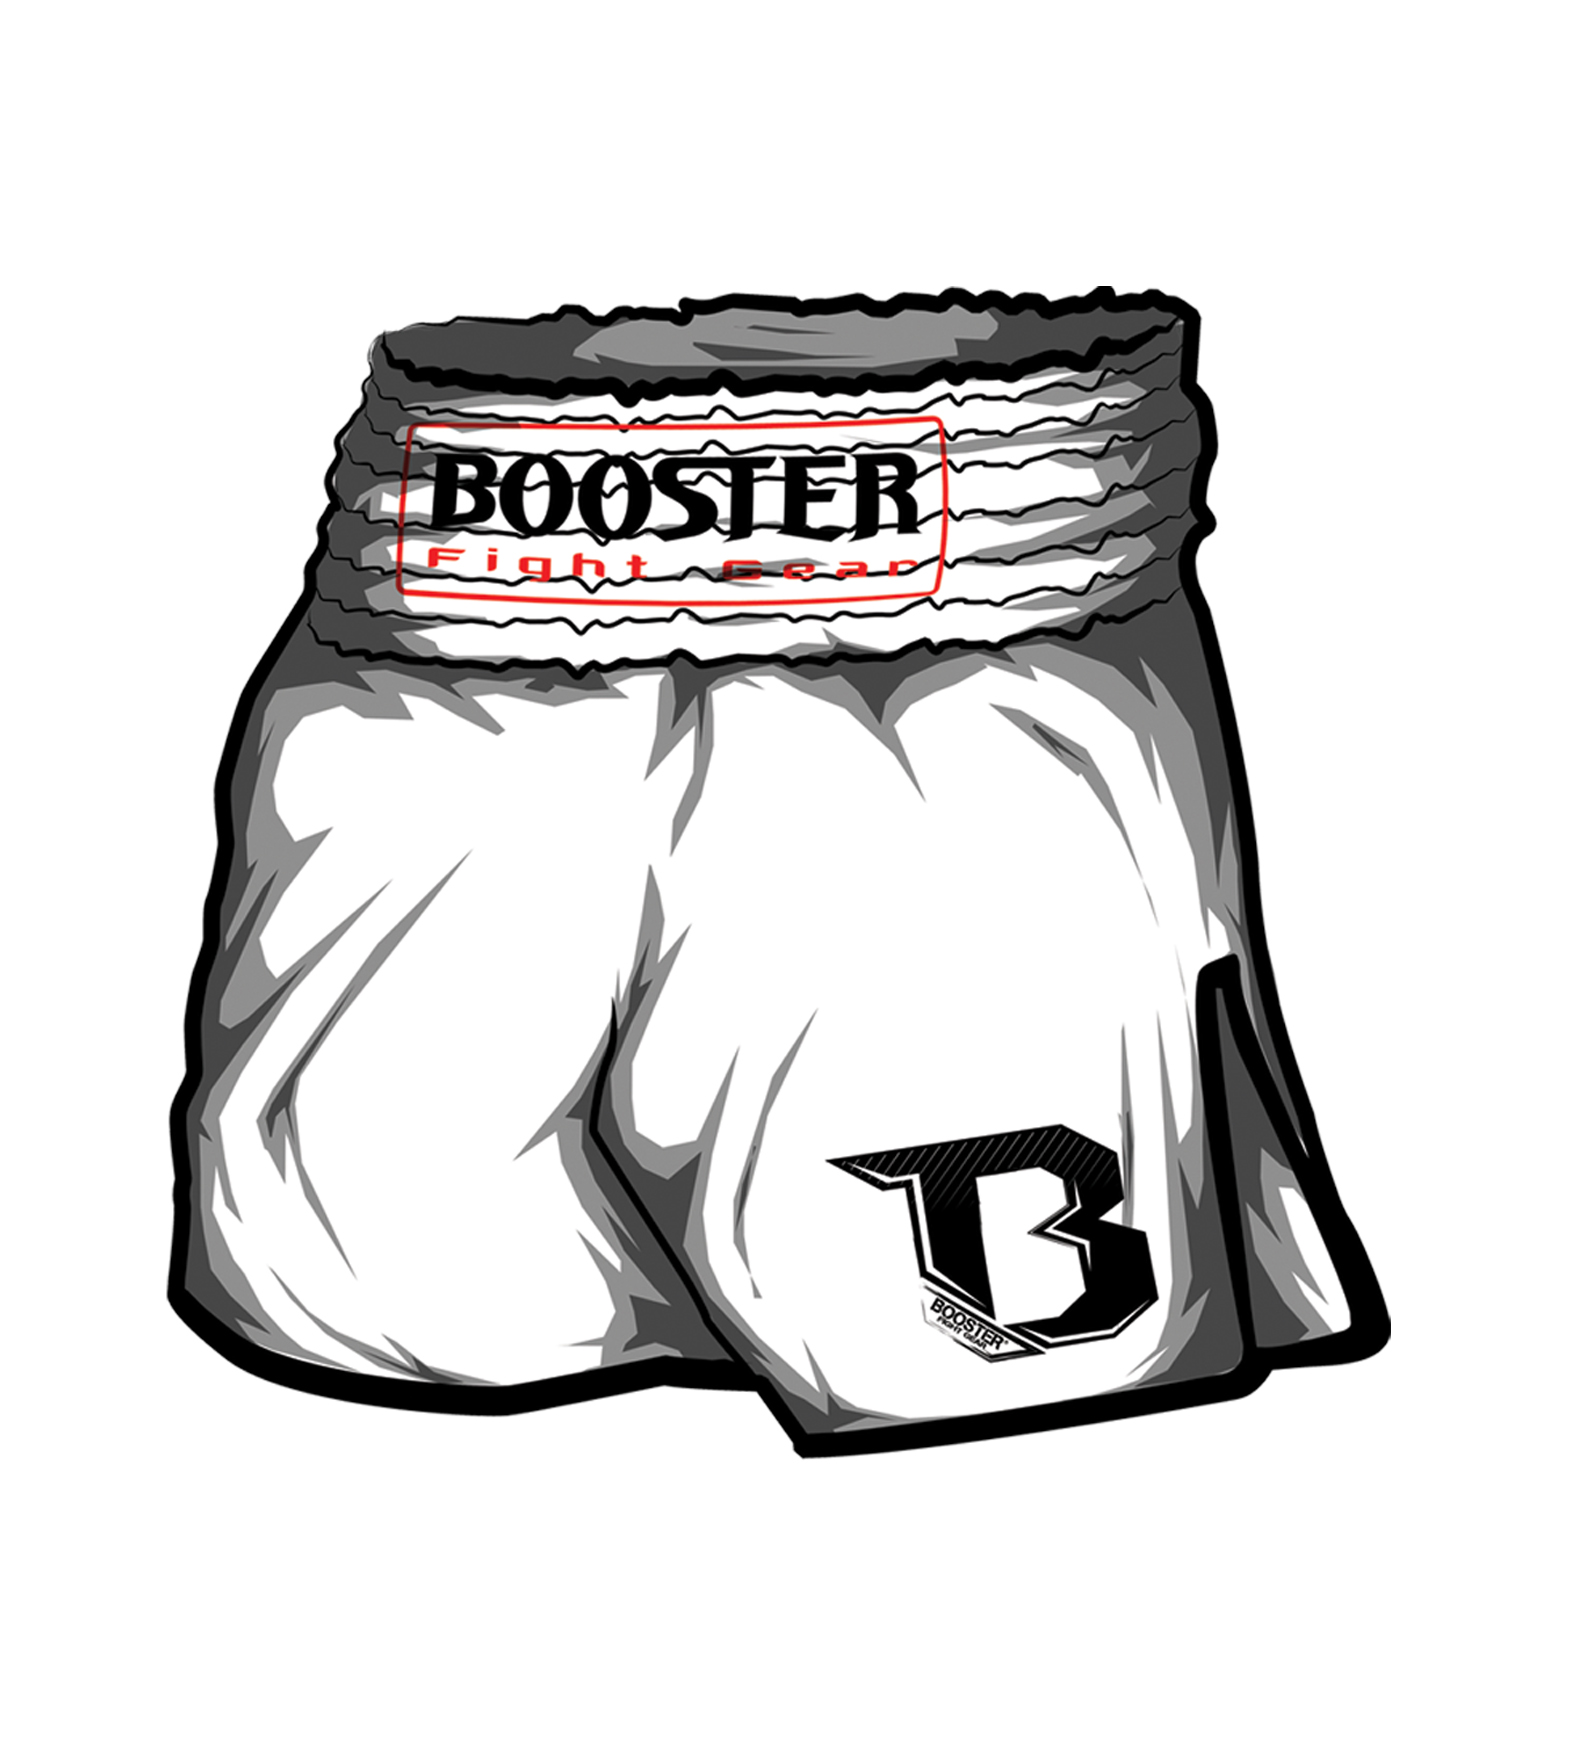 Booster  TBS trunks white - L